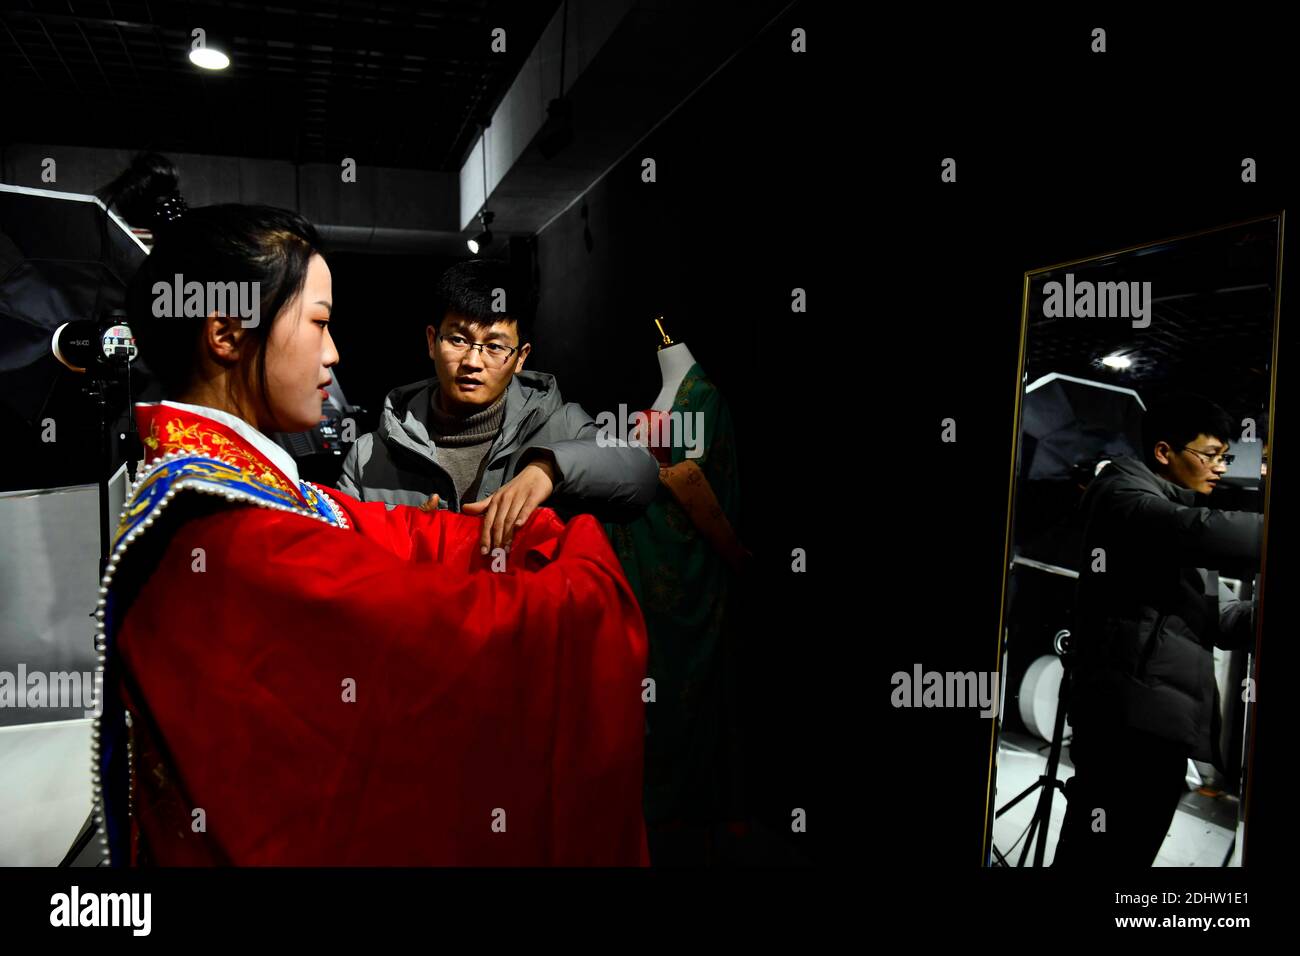 (201212) -- JINAN, Dec. 12, 2020 (Xinhua) -- Hu Chunqing (R) guides a student to perform a ritualistic salute at a secondary vocational school in Caoxian County, east China's Shandong Province, Dec. 11, 2020. While continuing with his study, Hu Chunqing, who is now a PhD student, returned to his hometown in Daji Township of Caoxian County, east China's Shandong Province in 2018 to help his wife Meng Xiaoxia start their own business in making and selling performance costumes and hanfu, a type of traditional clothing of the Han ethnic group. Their business kept booming with Meng working as the d Stock Photo